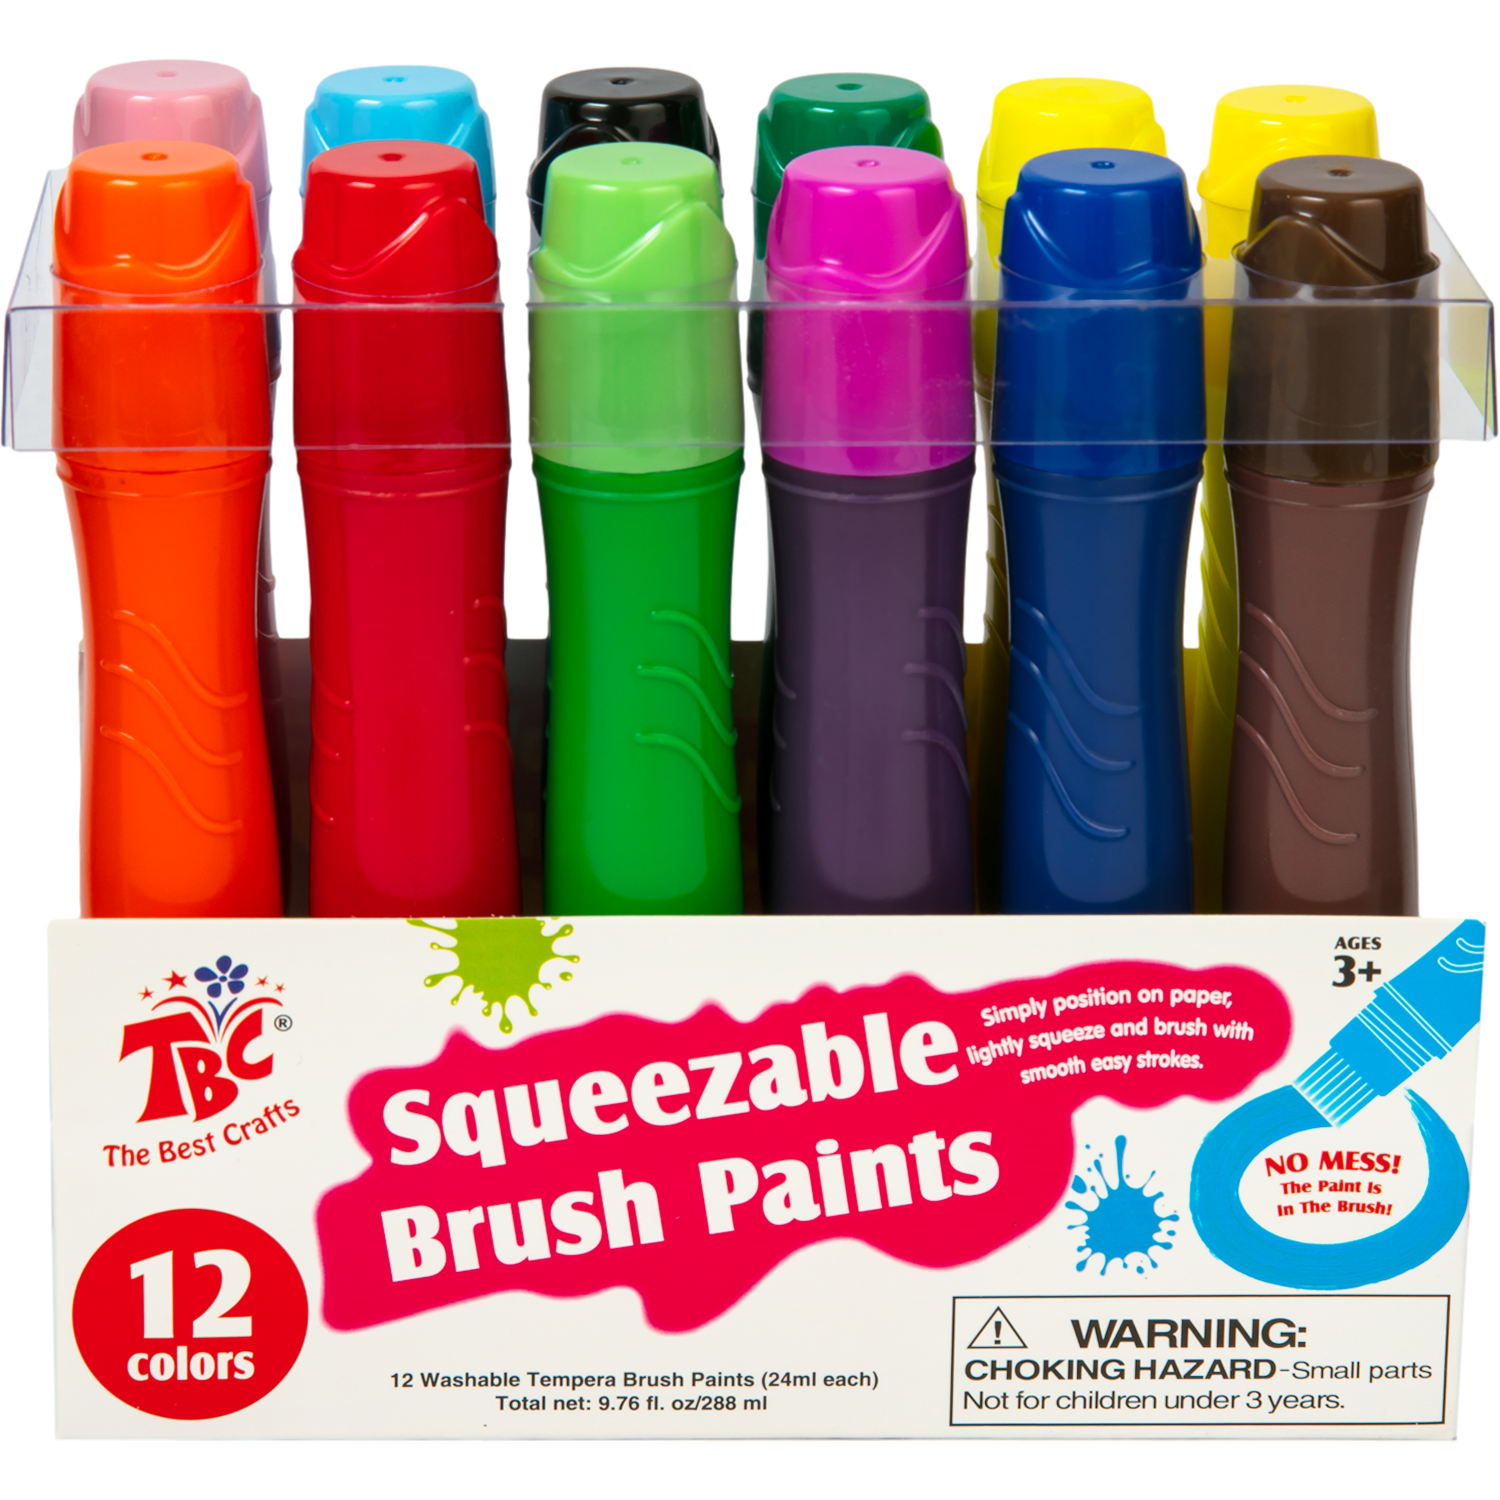 TBC The Best Crafts Washable Tempera Paint for Kids, 6 Sparkle